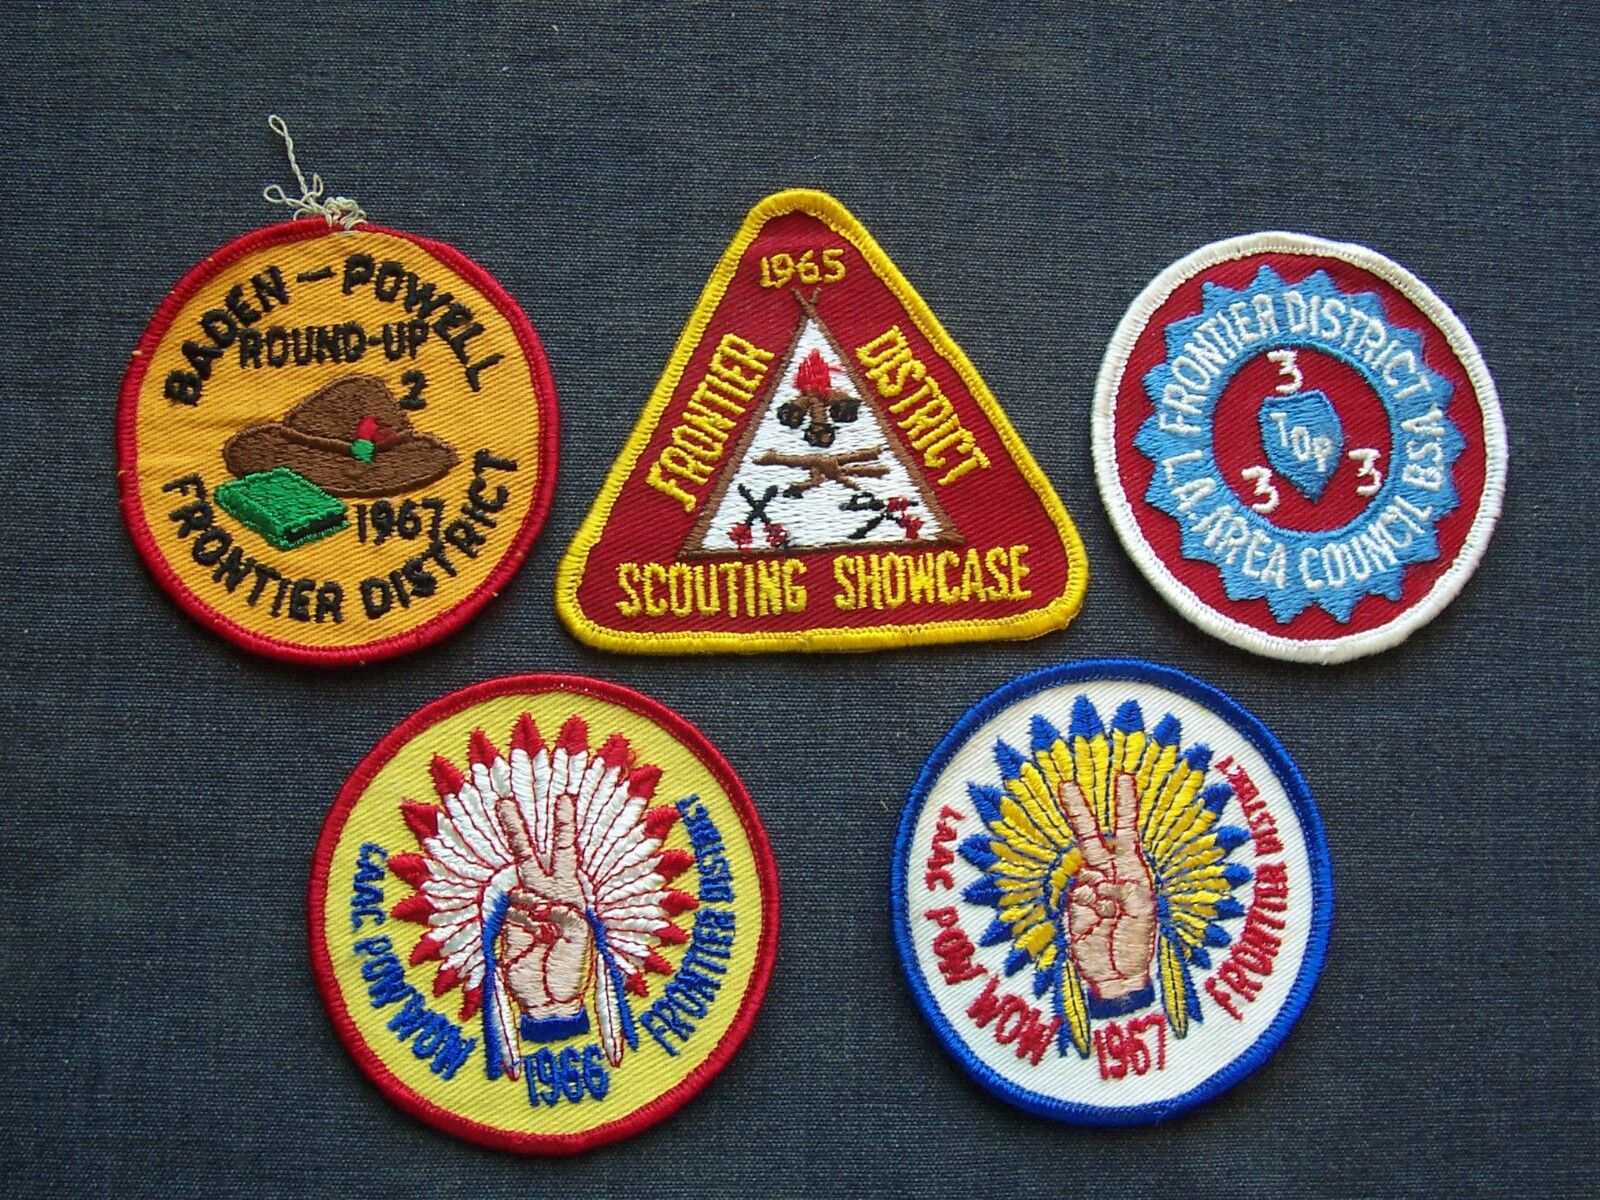 lot of 1960s Frontier District BSA Boy Scout patches - LAAC Pow Wow, etc, v nice